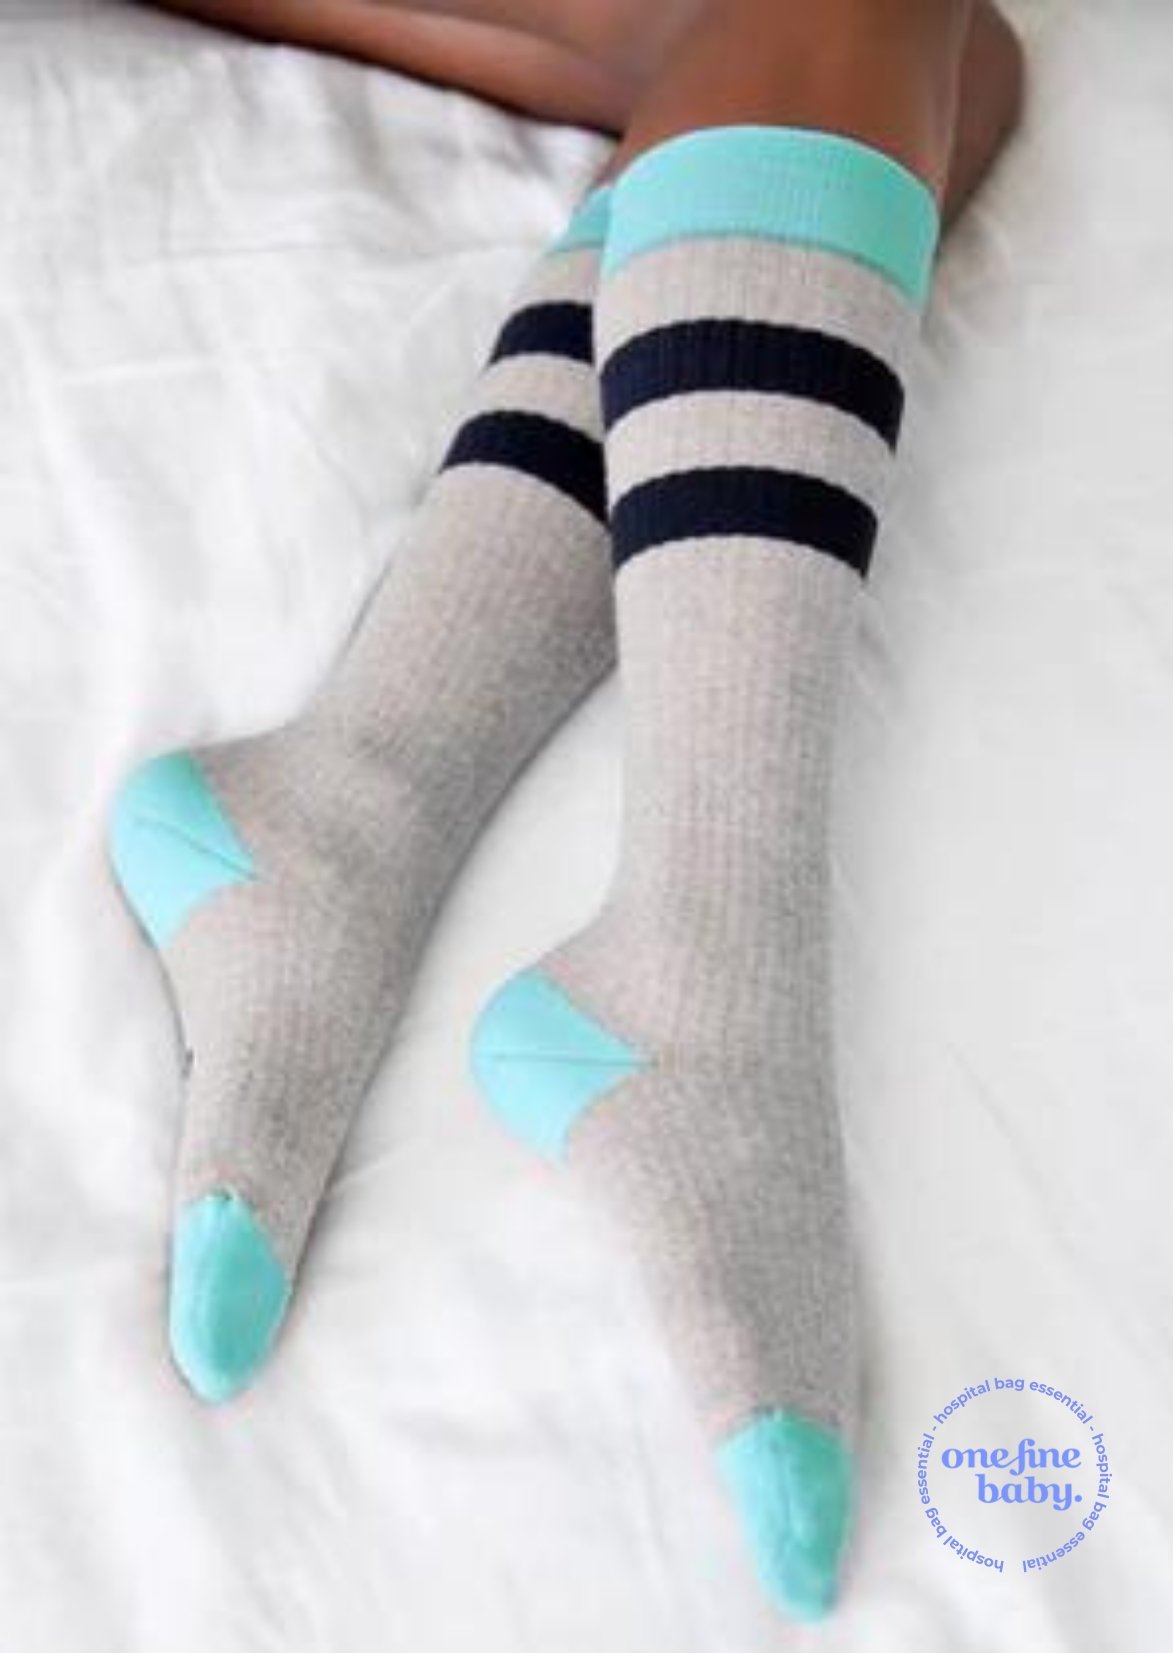 Thery Group Grey Marle/Mint Comforter Maternity Compression Socks side view - one fine baby hospital bag essentials list logo